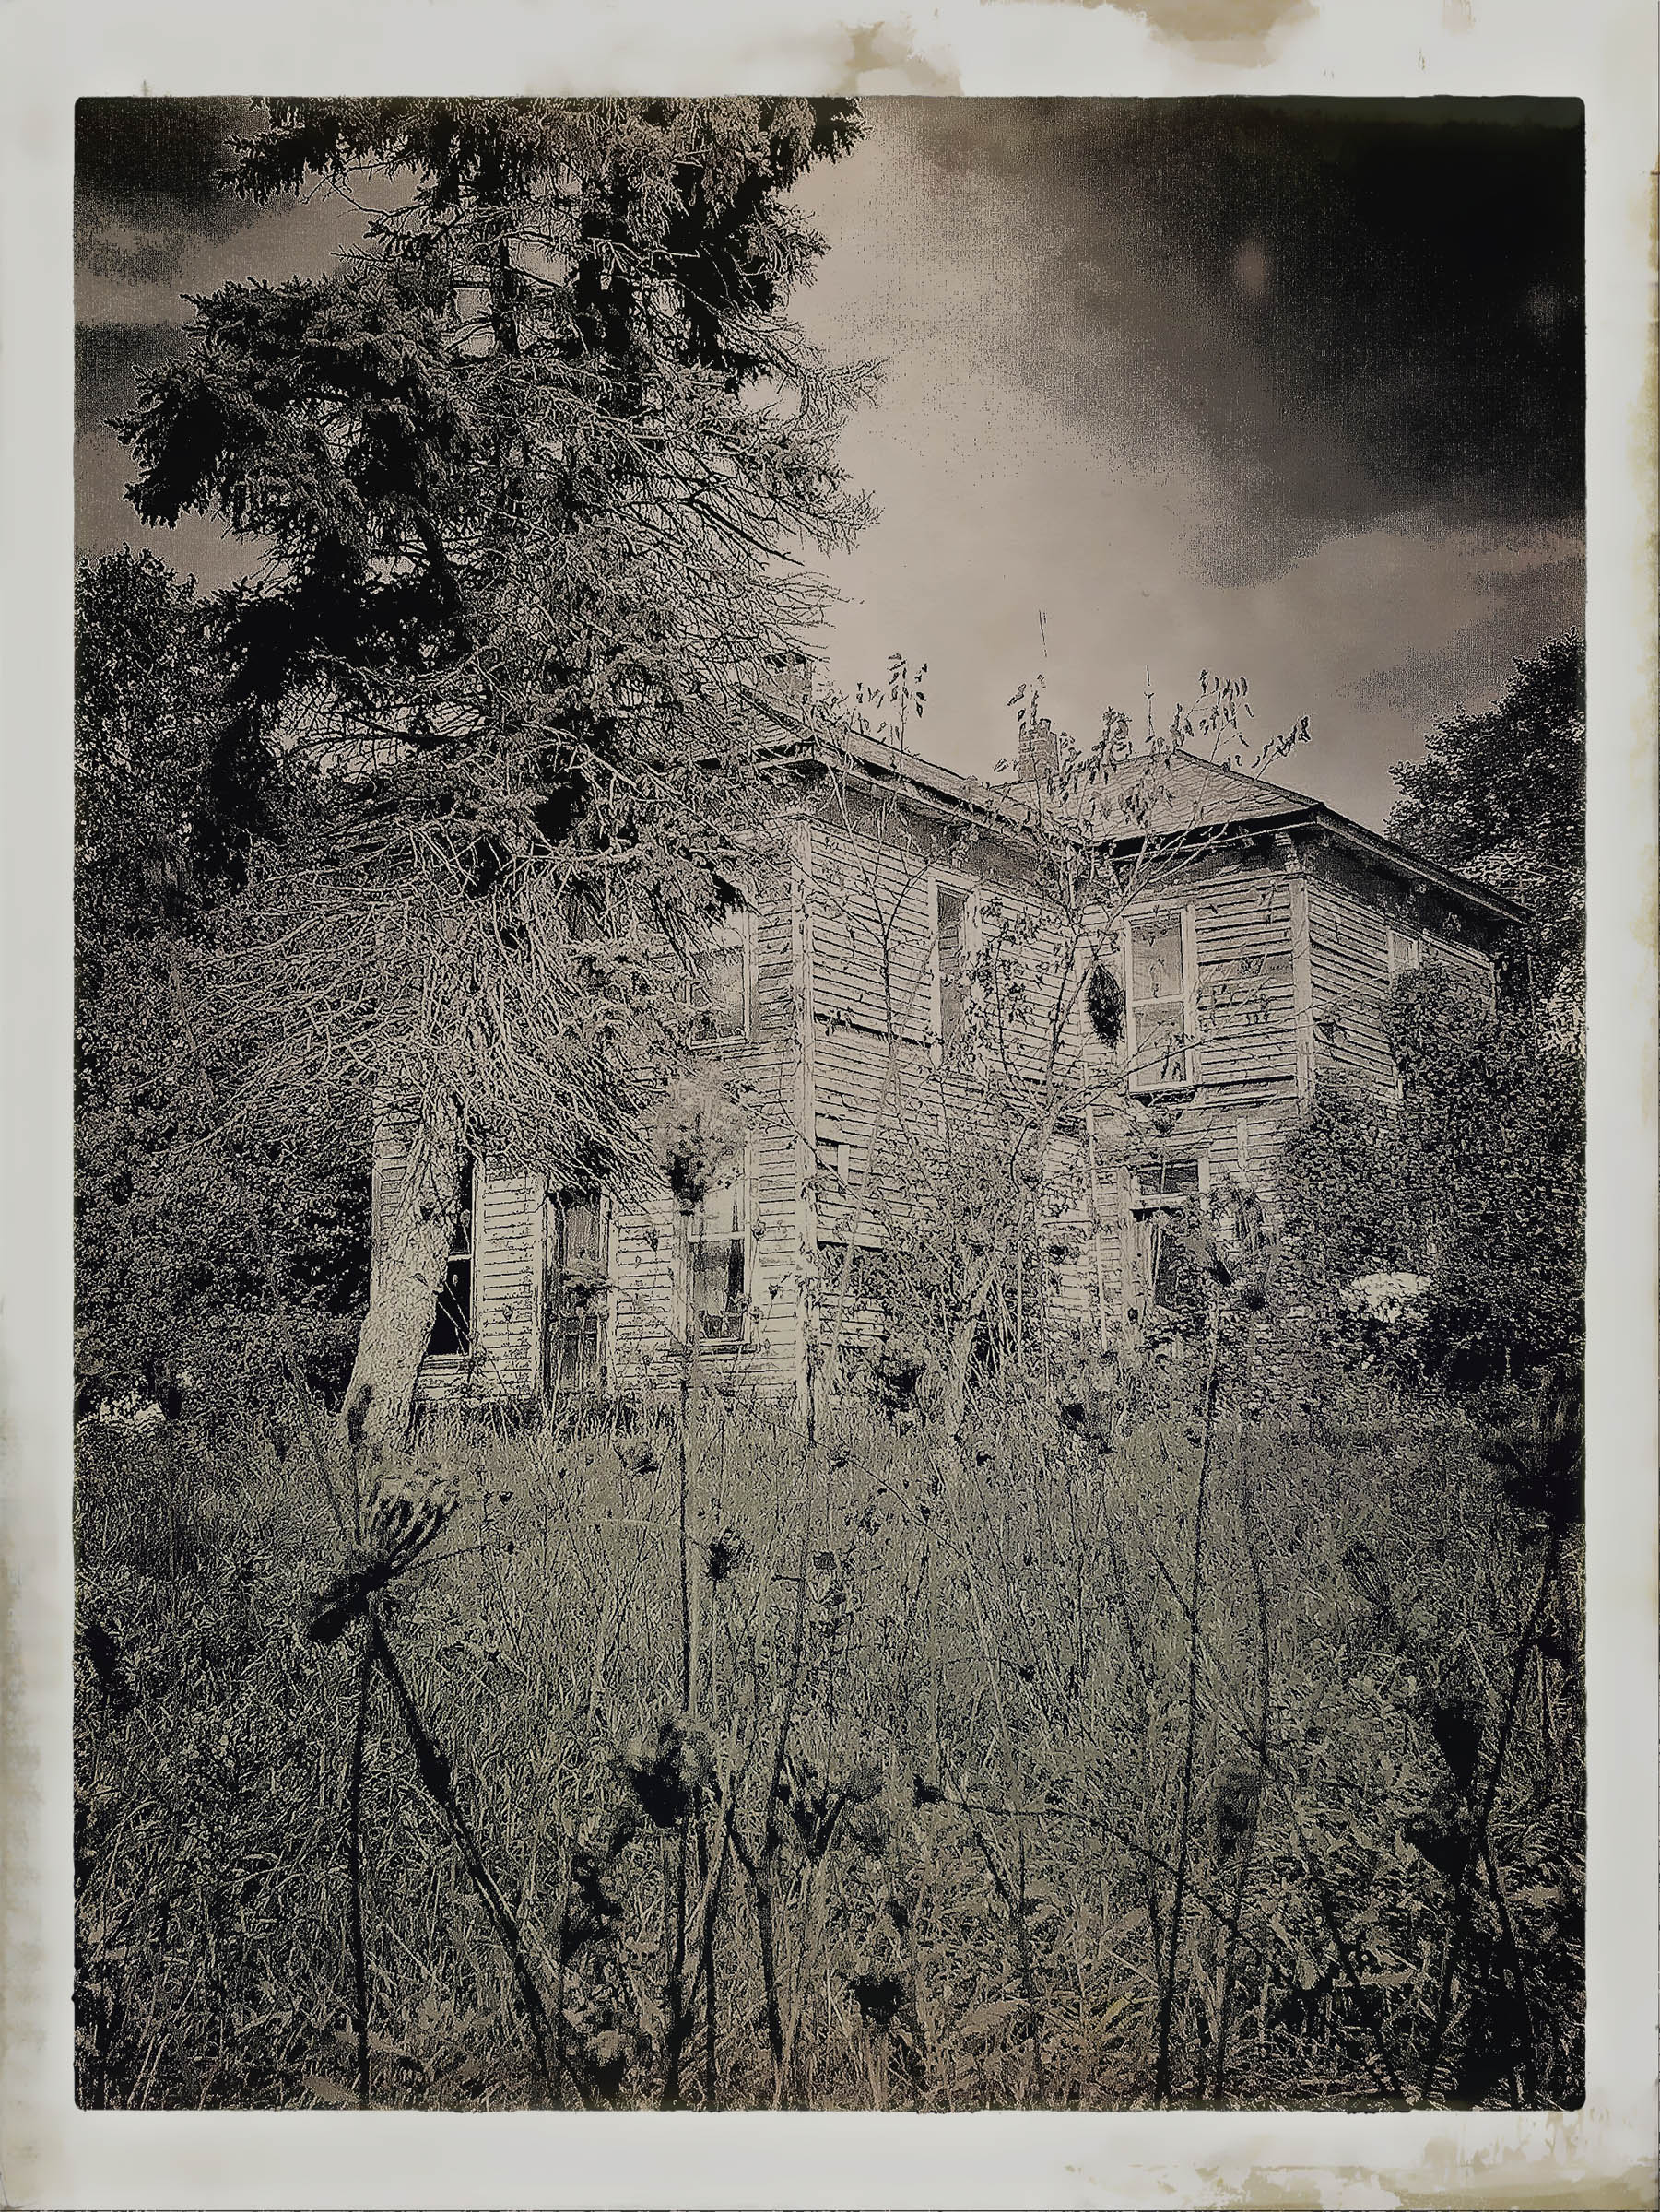 Abandoned Farm House in the Corn Indiana Fine art Photography by Wick Beavers Photographer NYC LA Paris London